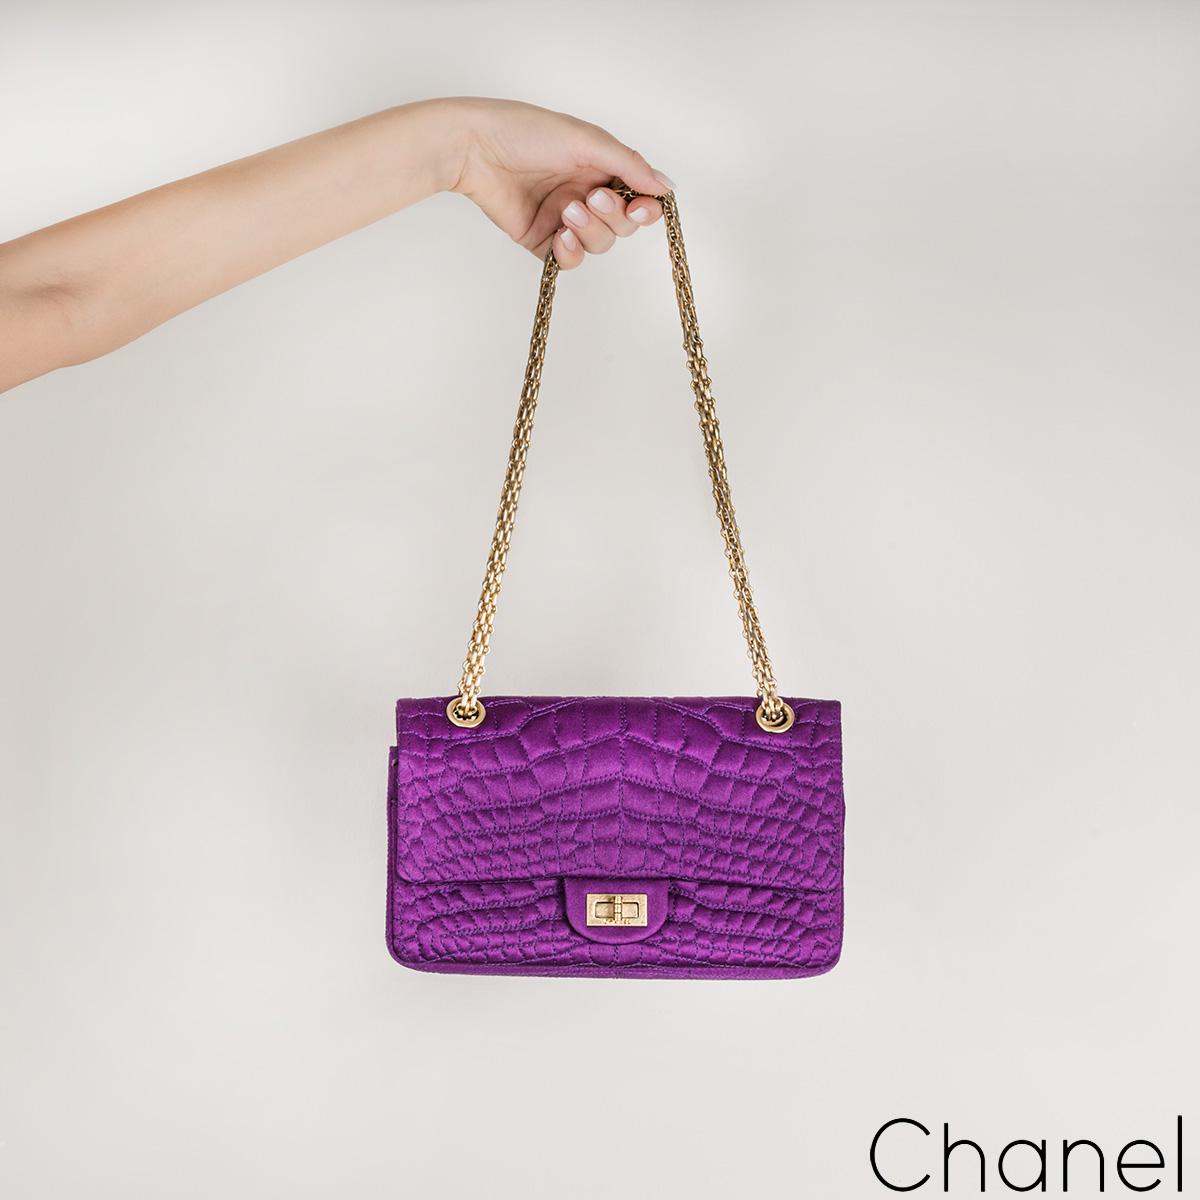 Chanel Purple Satin 2.55 Reissue Small 255 Bag For Sale 4